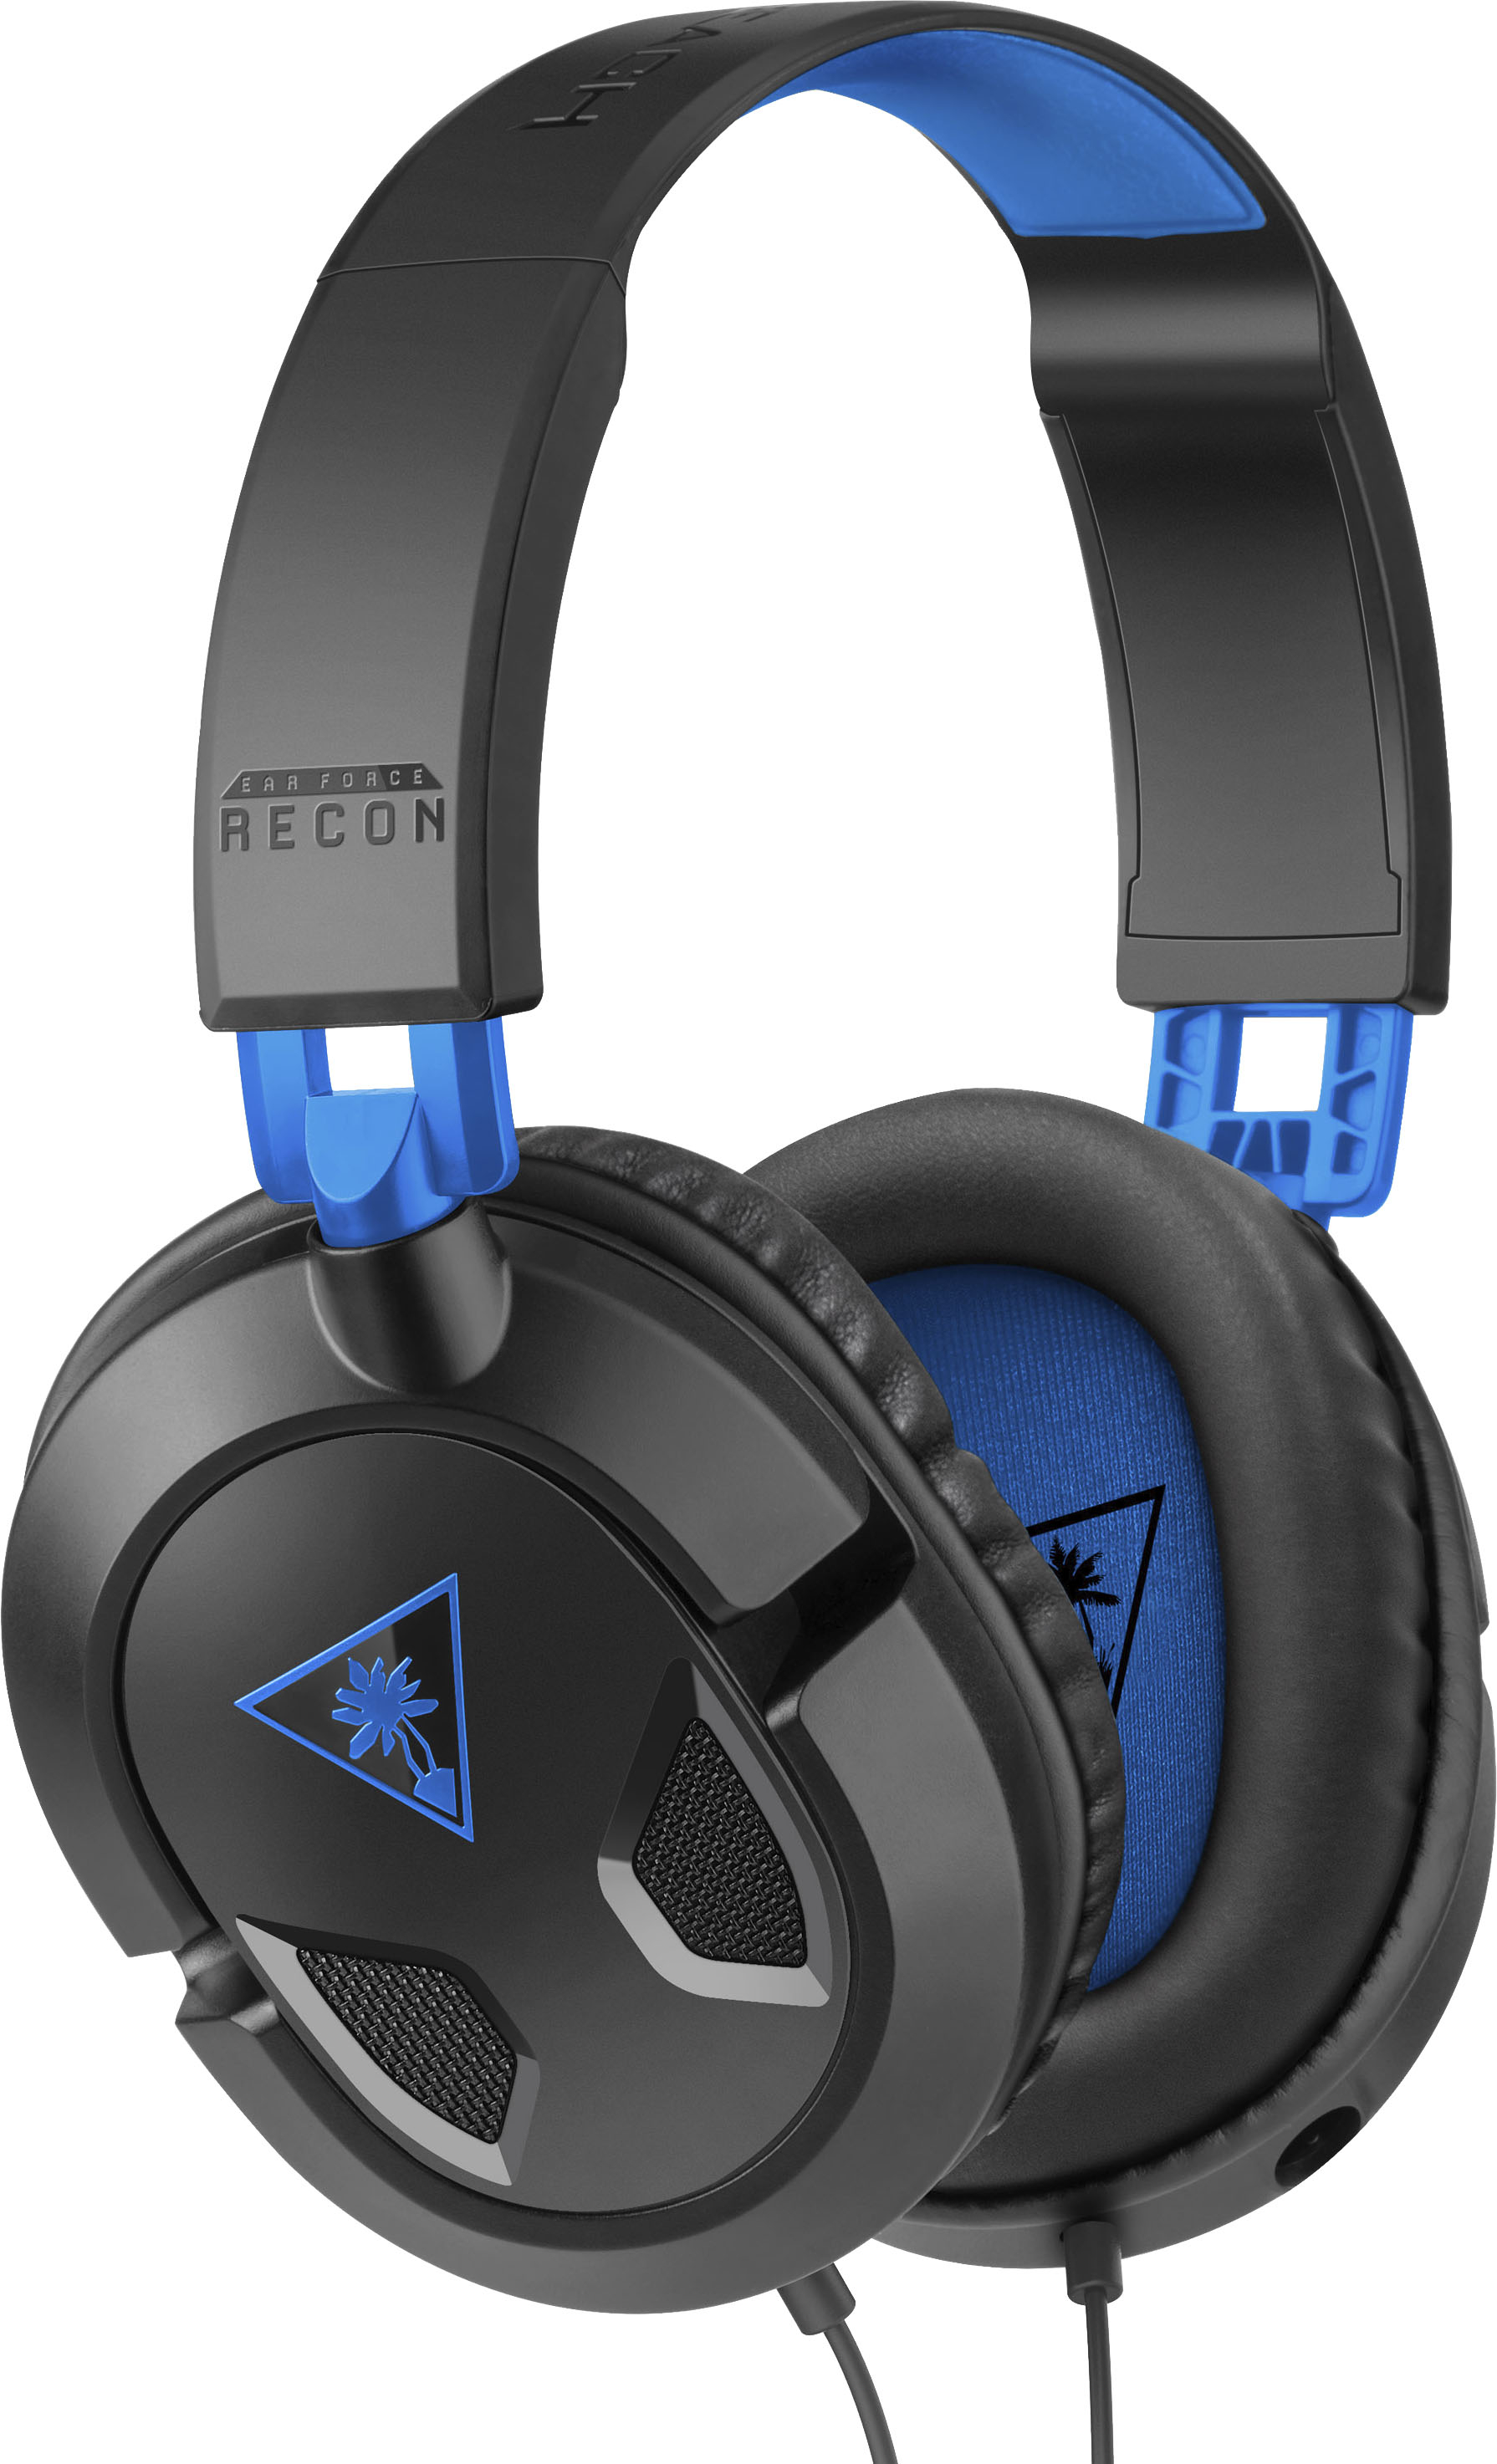 Angle View: Turtle Beach - Recon 50P Wired Gaming Headset for PlayStation, PS5, PS4, Xbox Series X | S, Xbox One, Nintendo Switch, Mobile & PC - Black/Blue